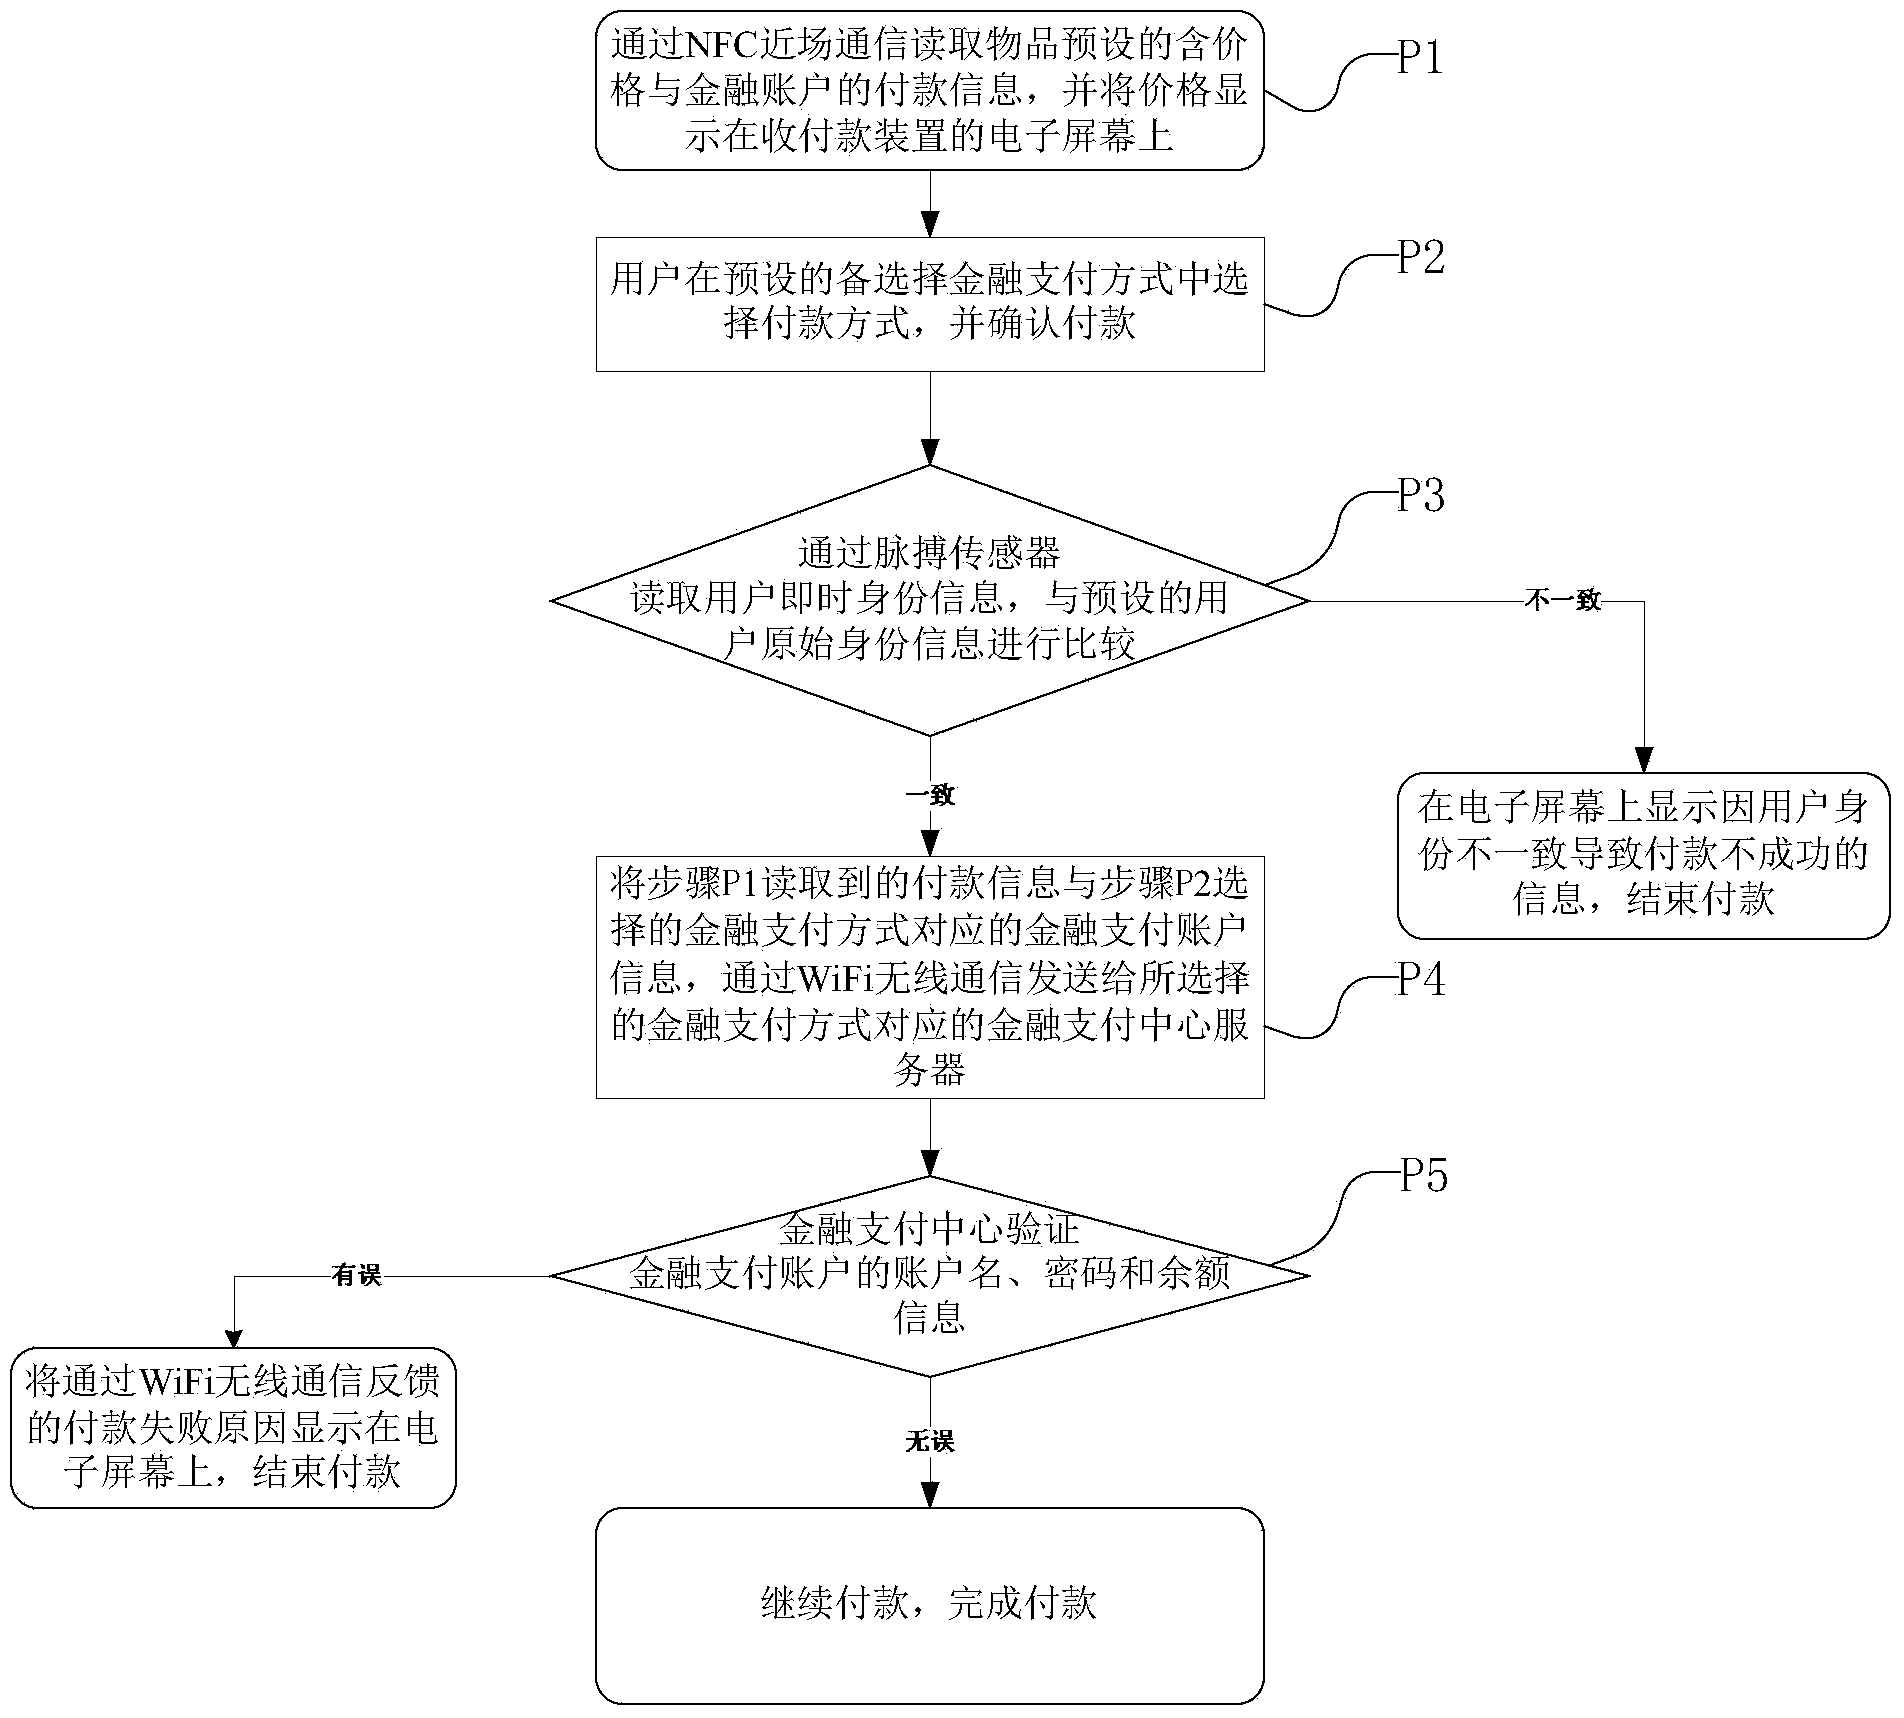 High-security portable collection and payment method